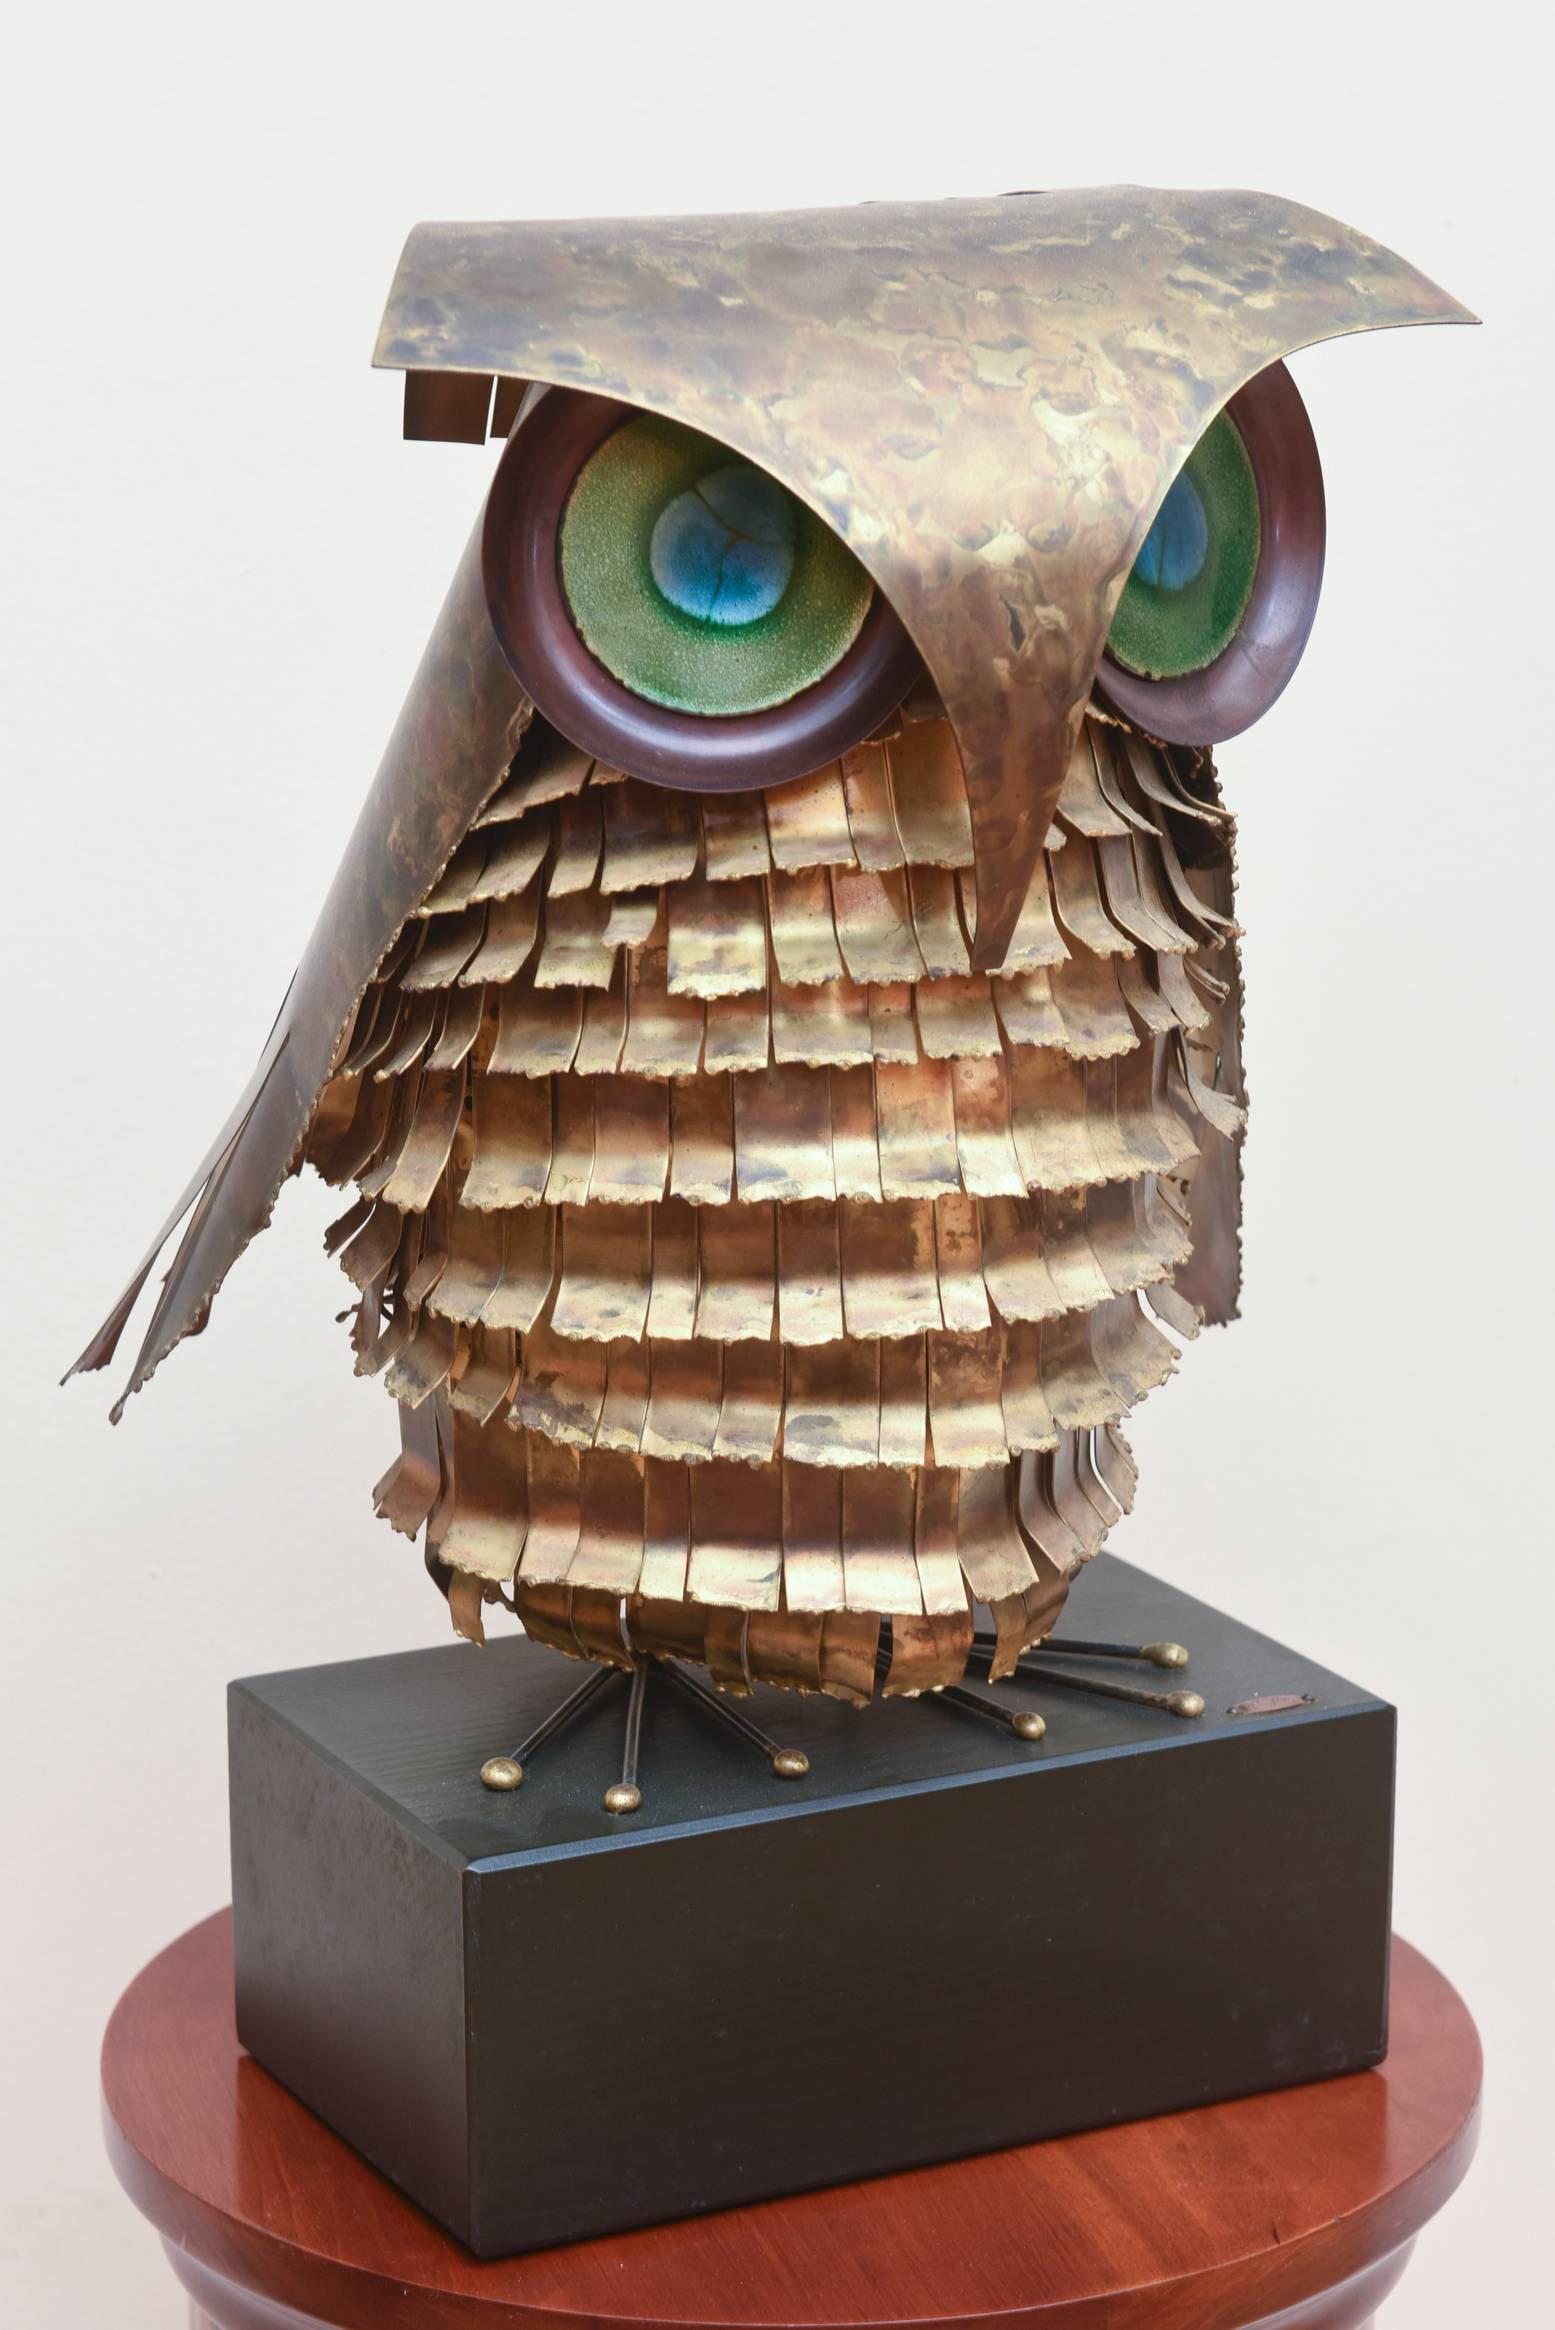 Original 1967 Curtis Jere metal owl sculpture featuring a richly patinaed metal body with multi color enameled eyes. Signed 